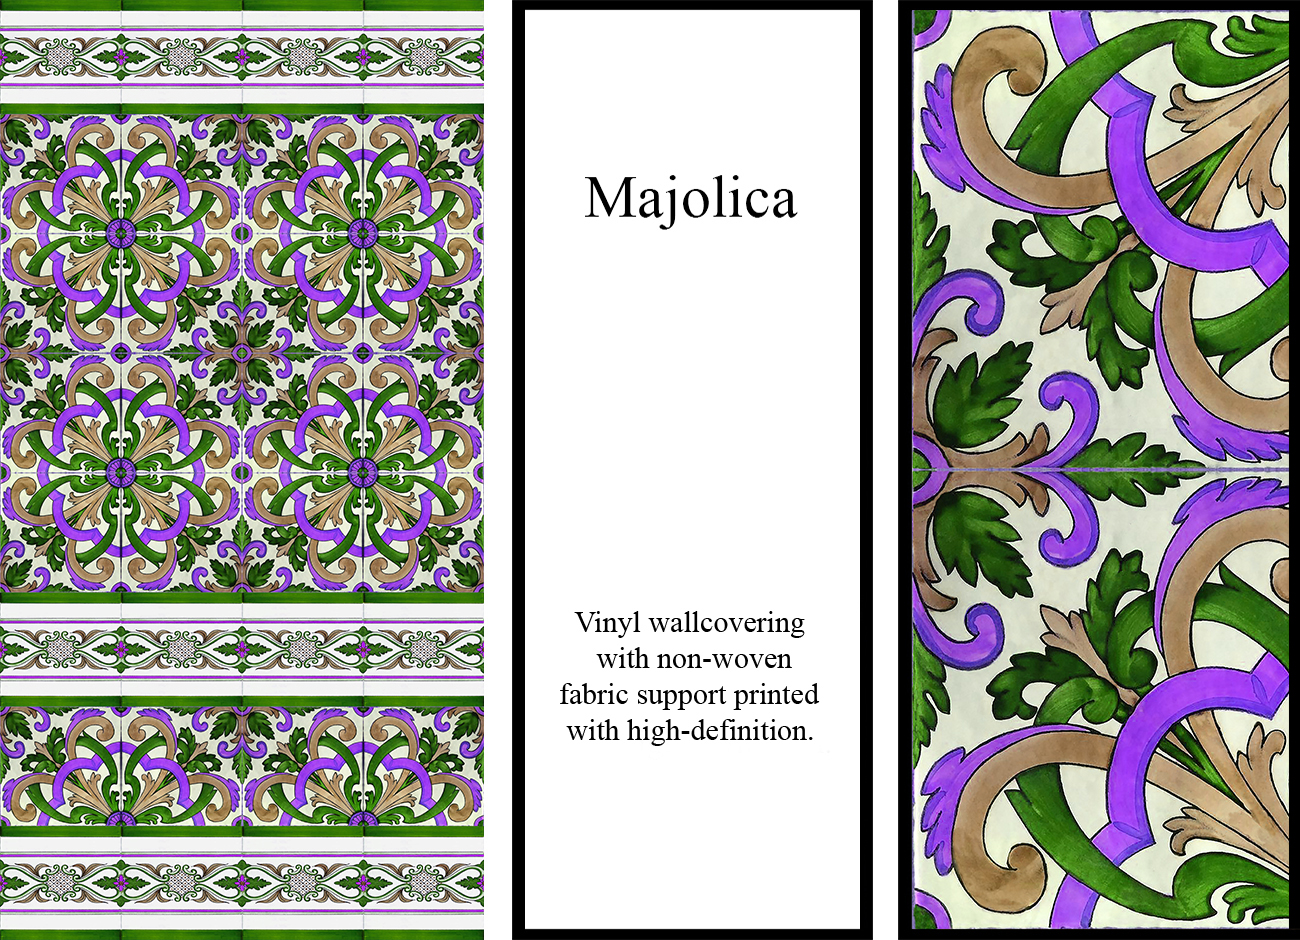 Mediterranean-style majolica wallpaper with floral motifs in bright violet, green and dove grey colours